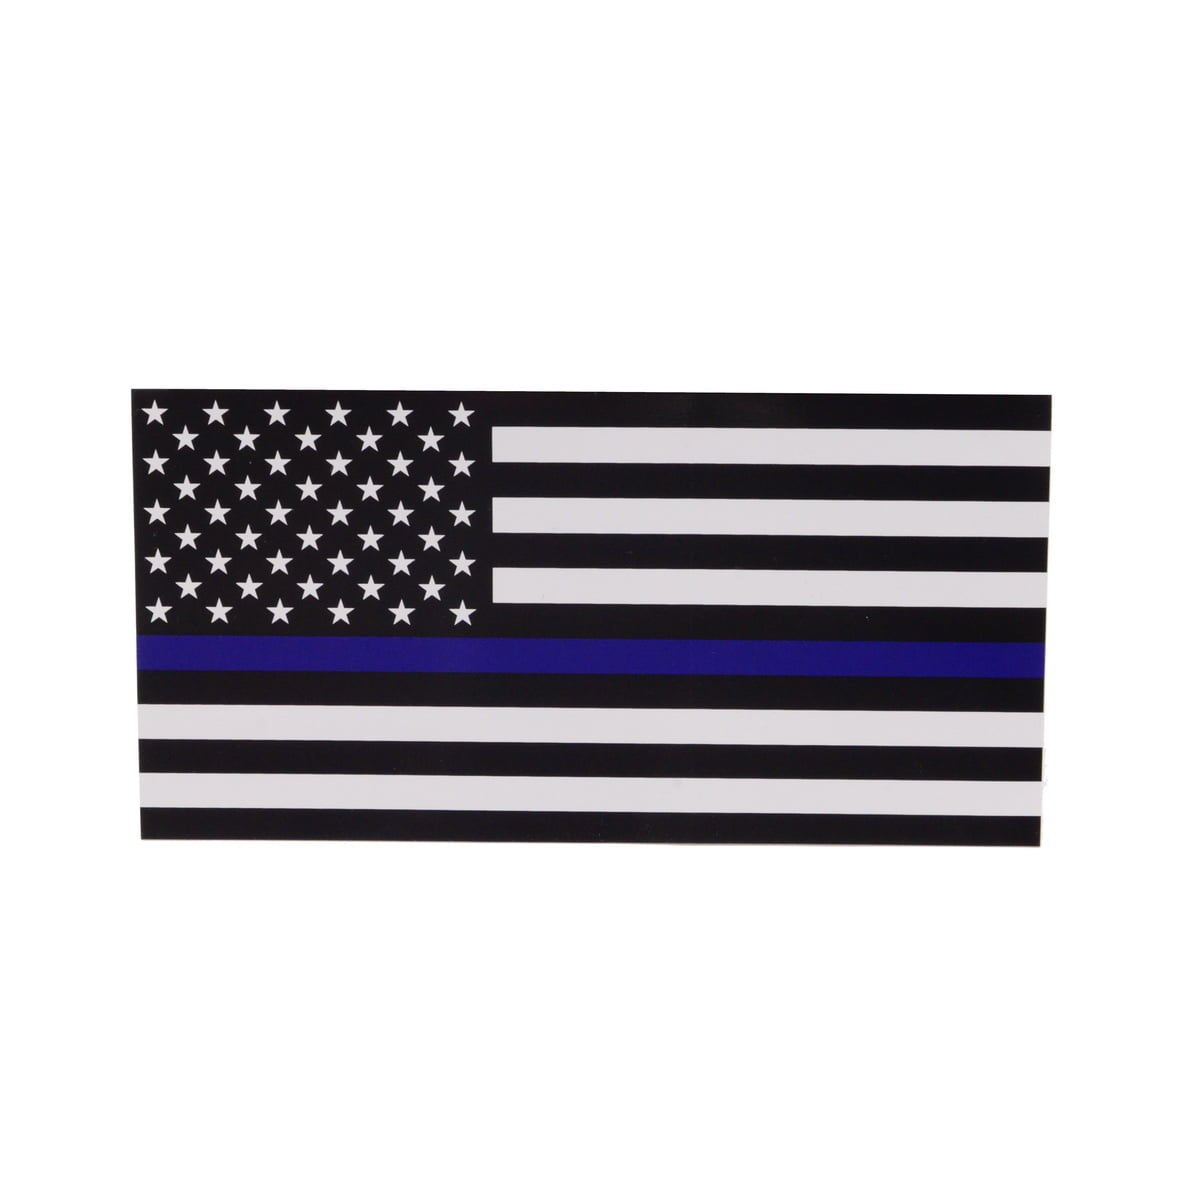 Thin Blue Line Police Lives Blue Lives Matter Cop REFLECTIVE Chevy Bow Tie Kit 